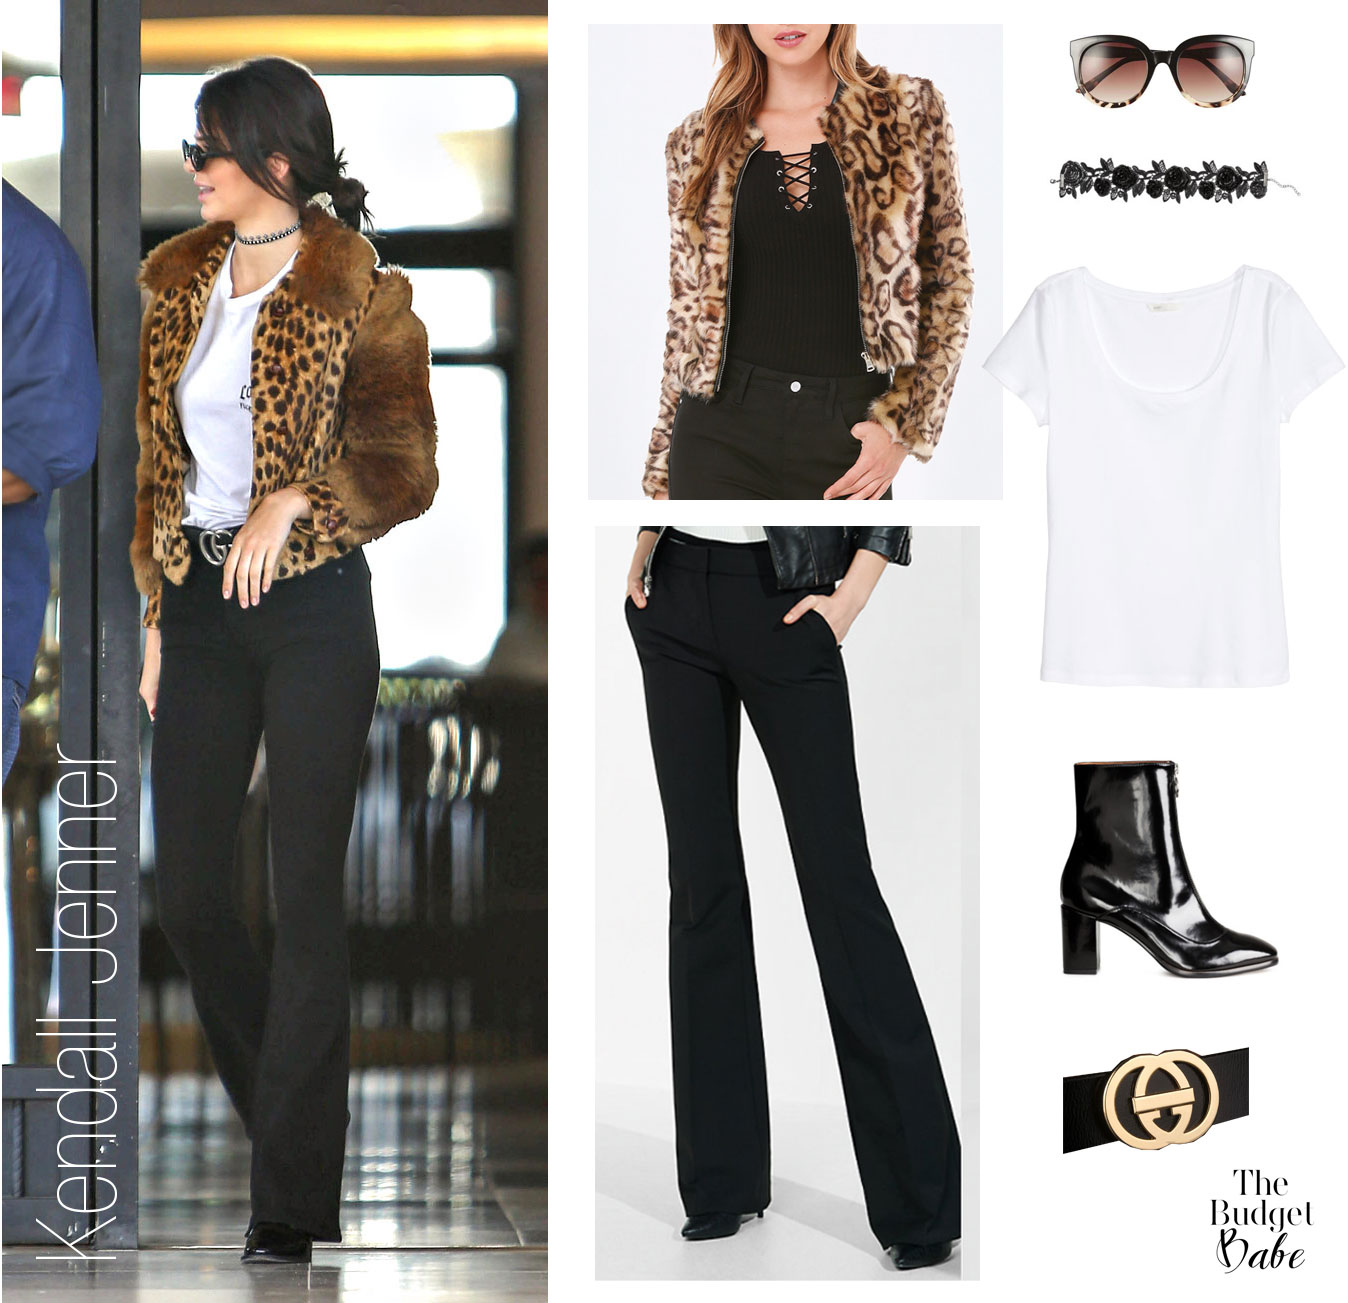 Kendall Jenner wears a leopard jacket with black flare pants and patent ankle booties.